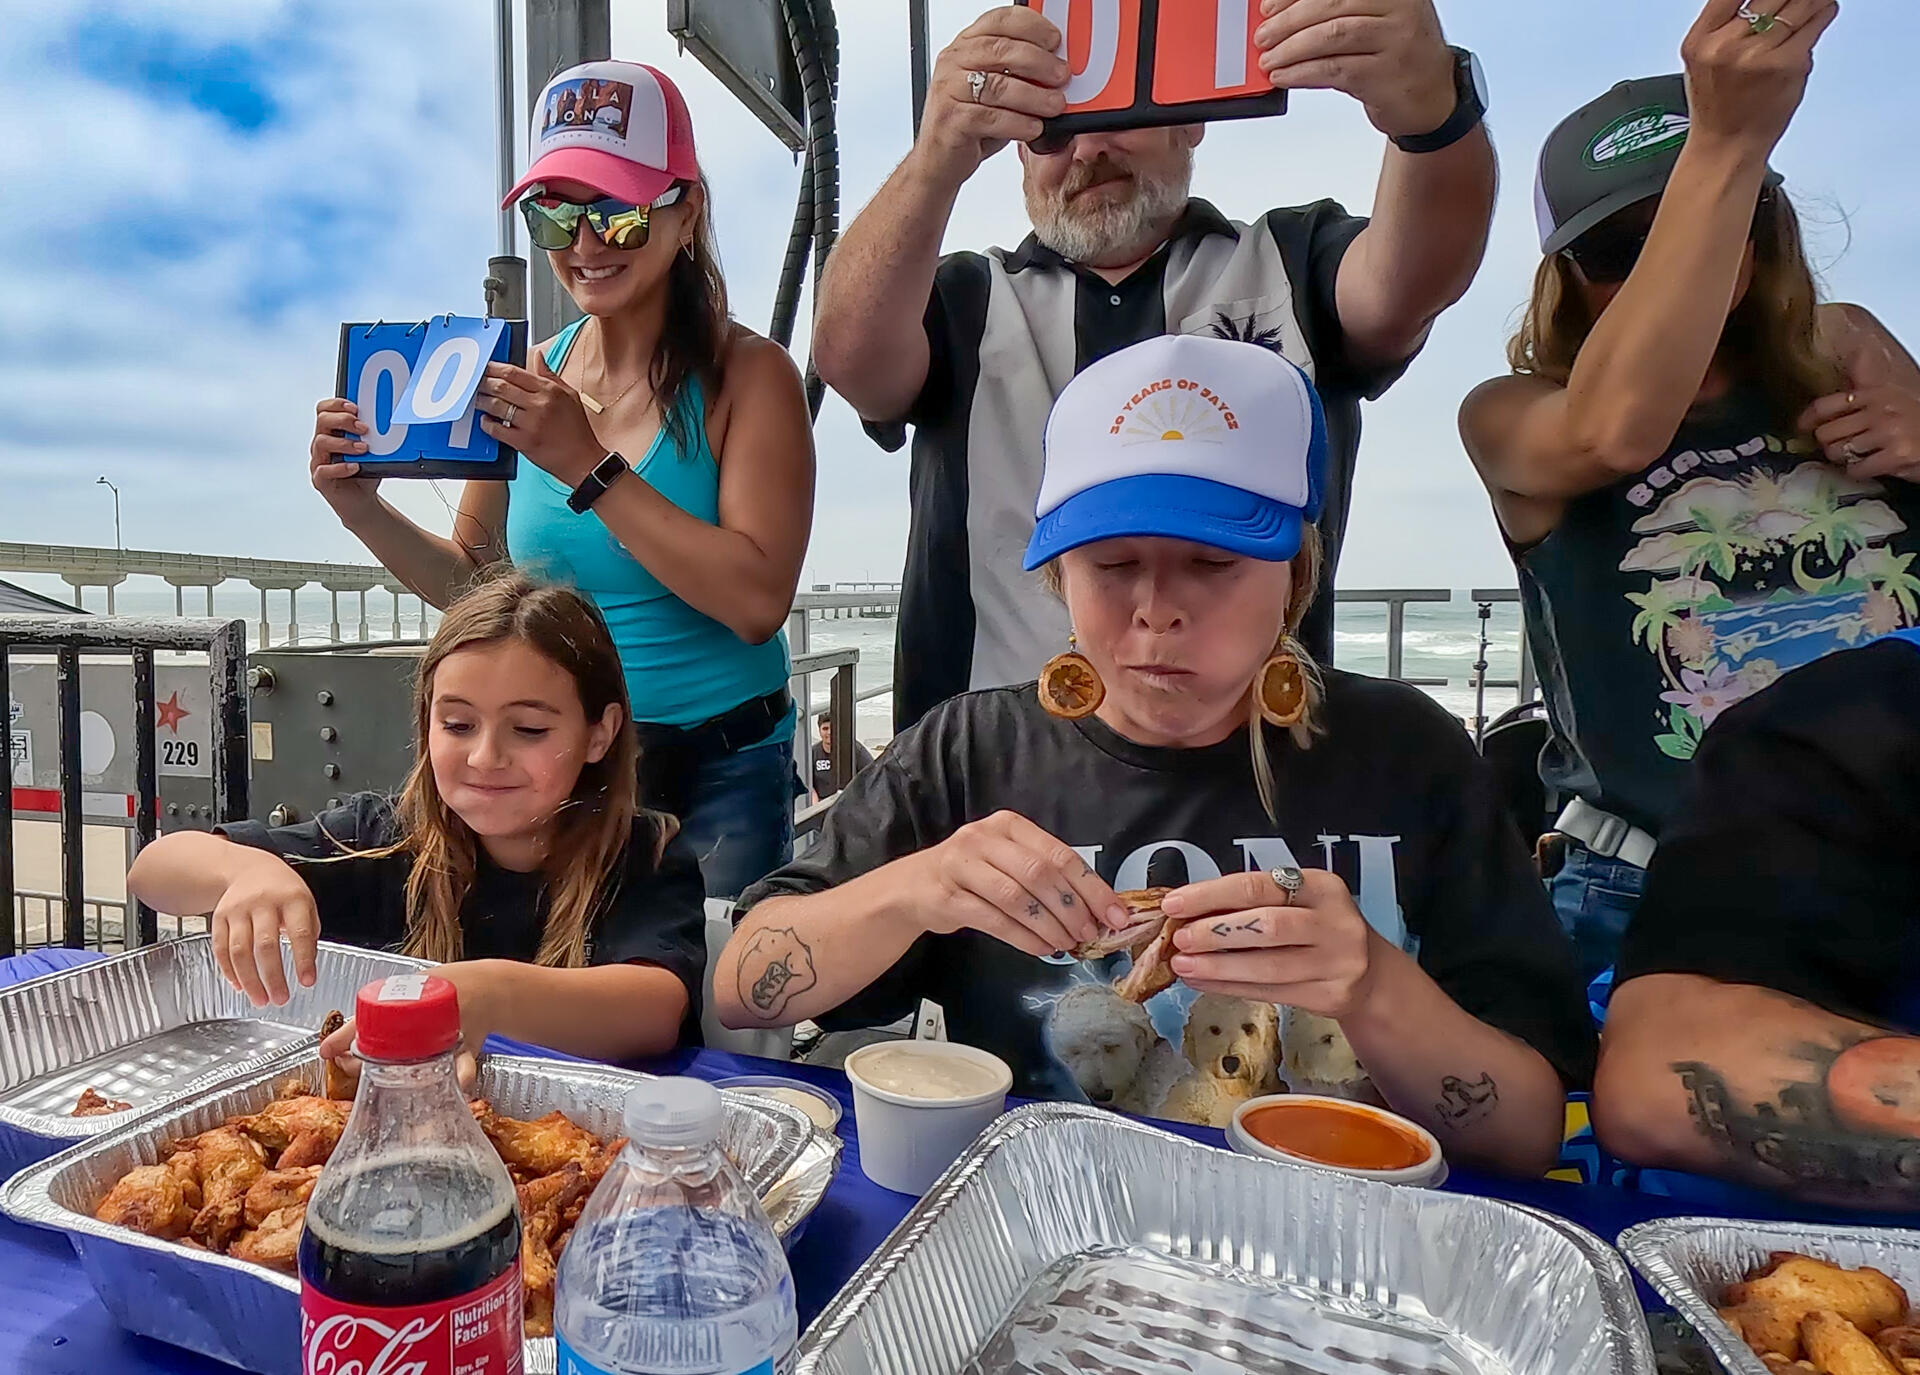 Photo of: 2024 Ocean Beach Street Fair and Chili Cook-Off - Dirty Birds Wing Eating Contest